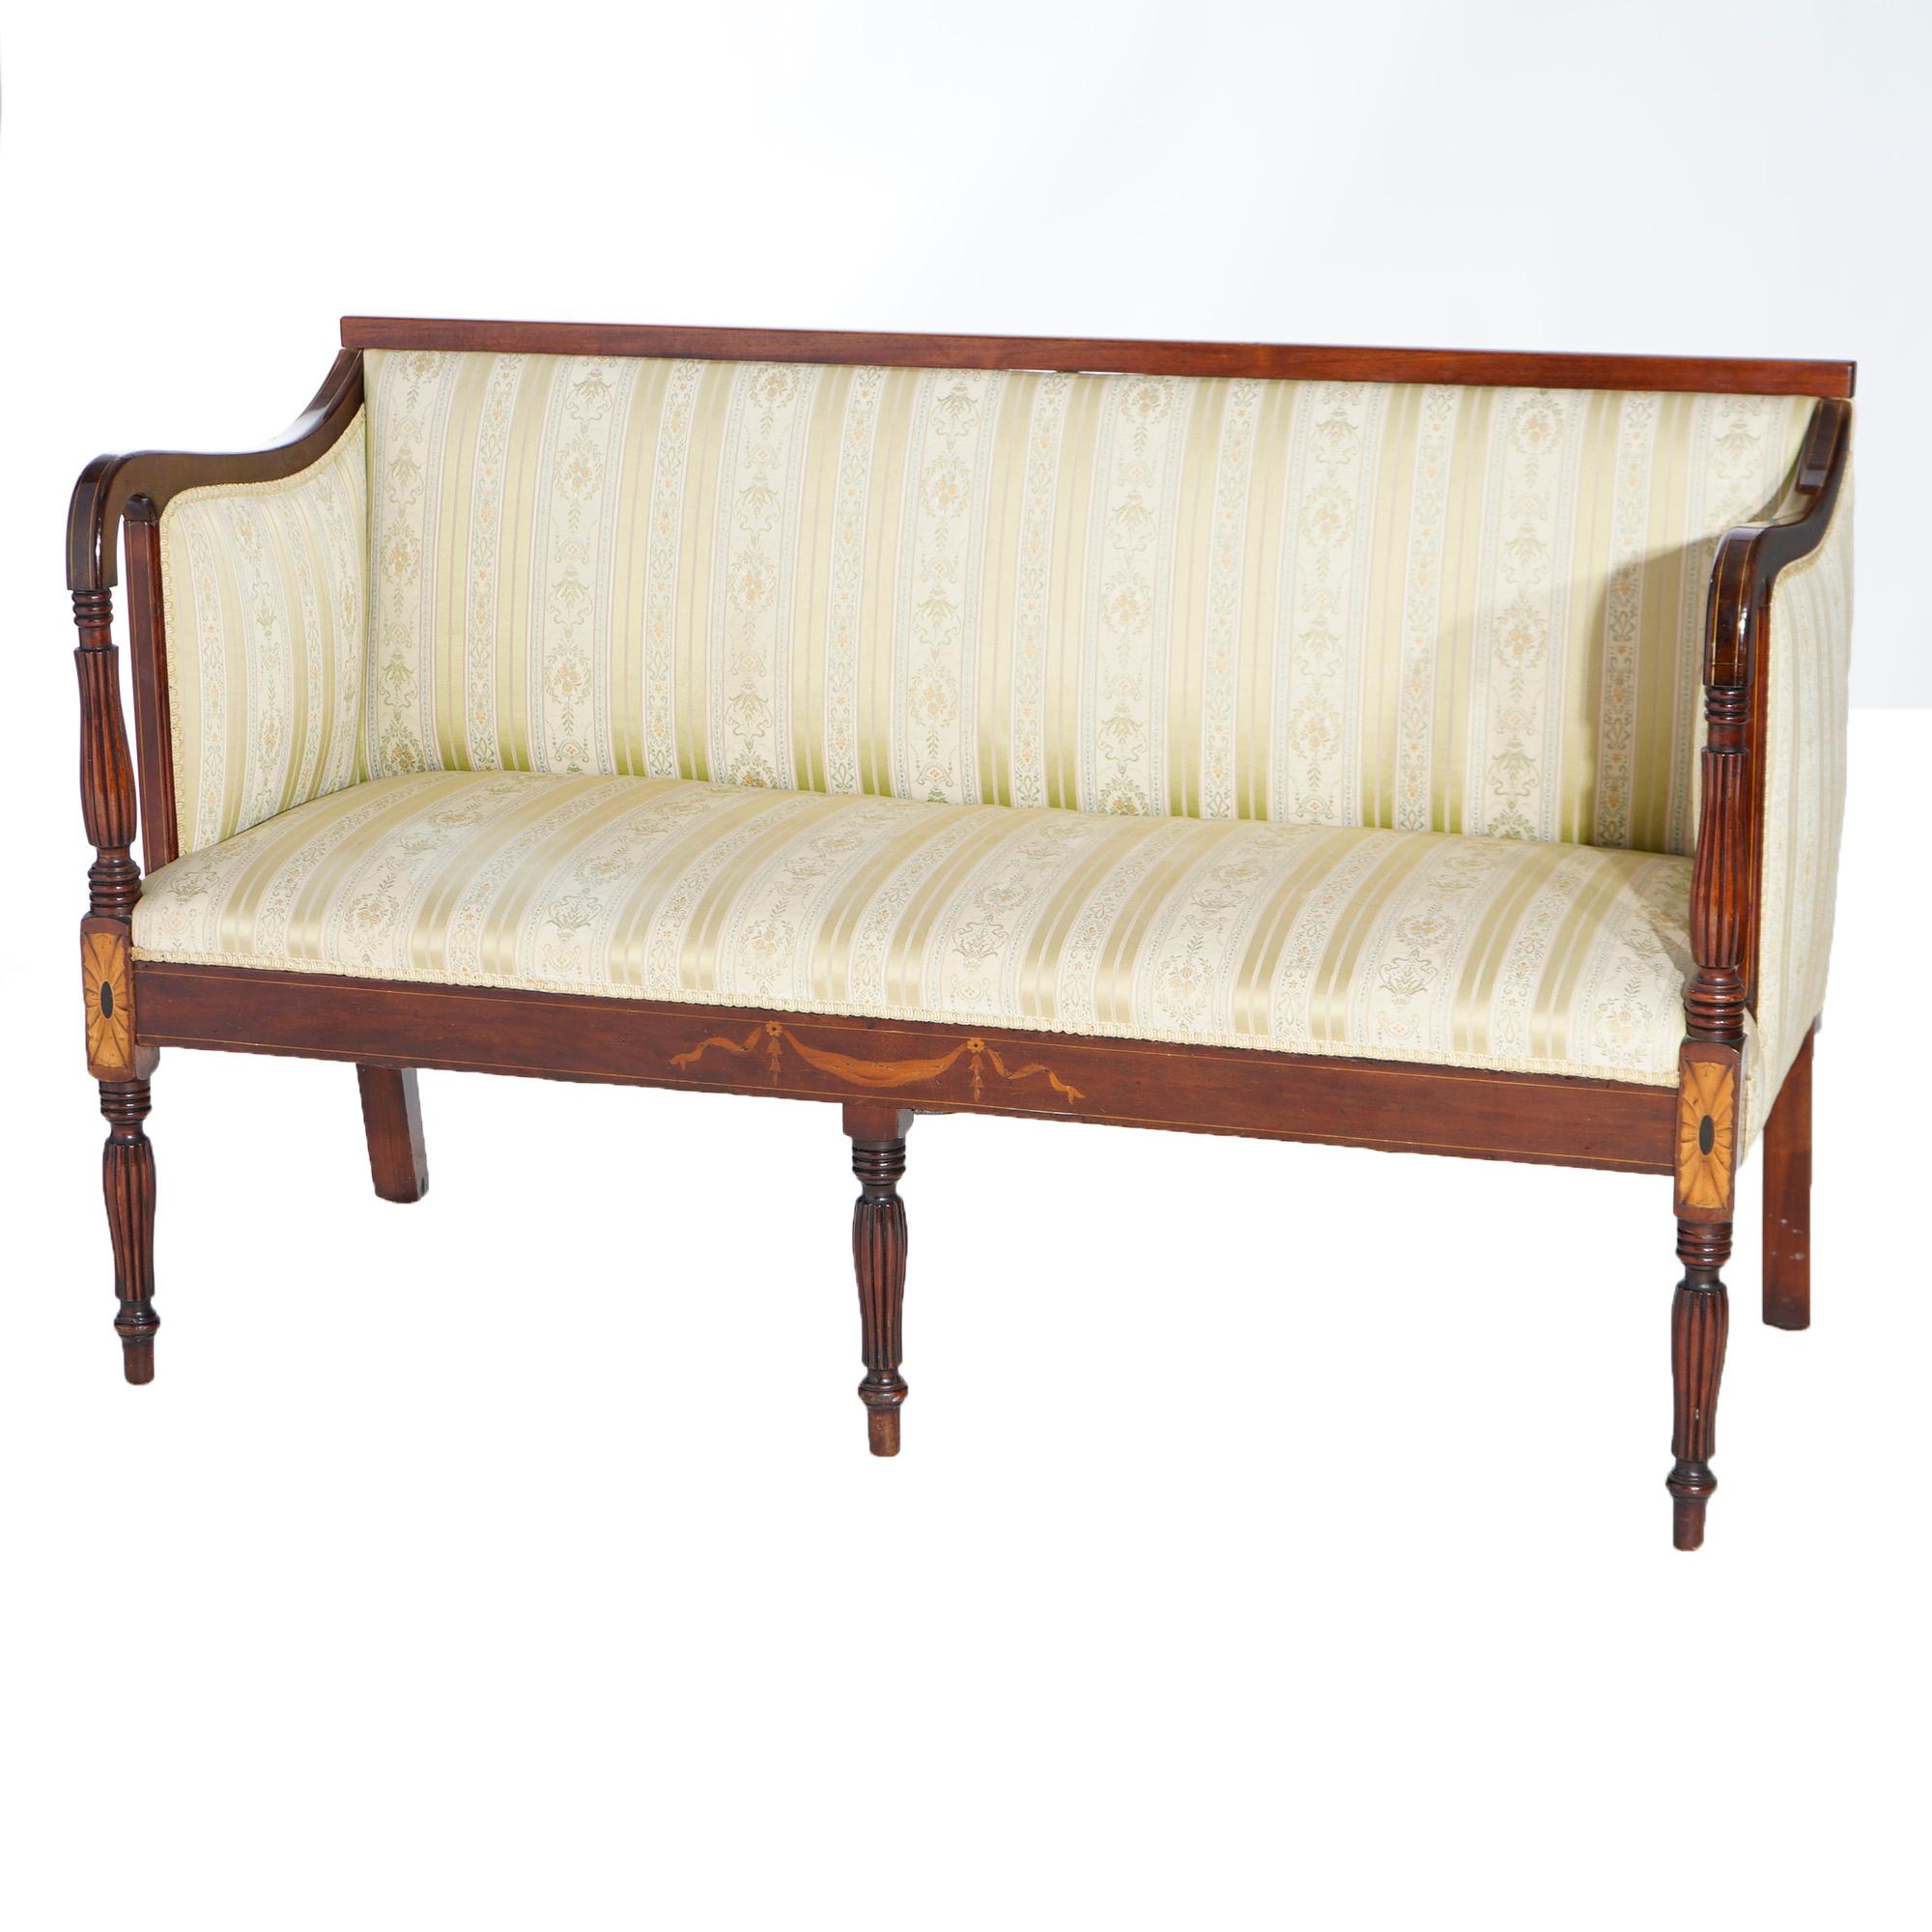 An antique Sheraton settee offers mahogany frame with upholstered back, sides and seats, curved arms with turned supports, satinwood inlaid patera and raised on turned legs, 19th century

Measures- 34.25''H x 54.5''W x 23.5''D; seat height 17.5